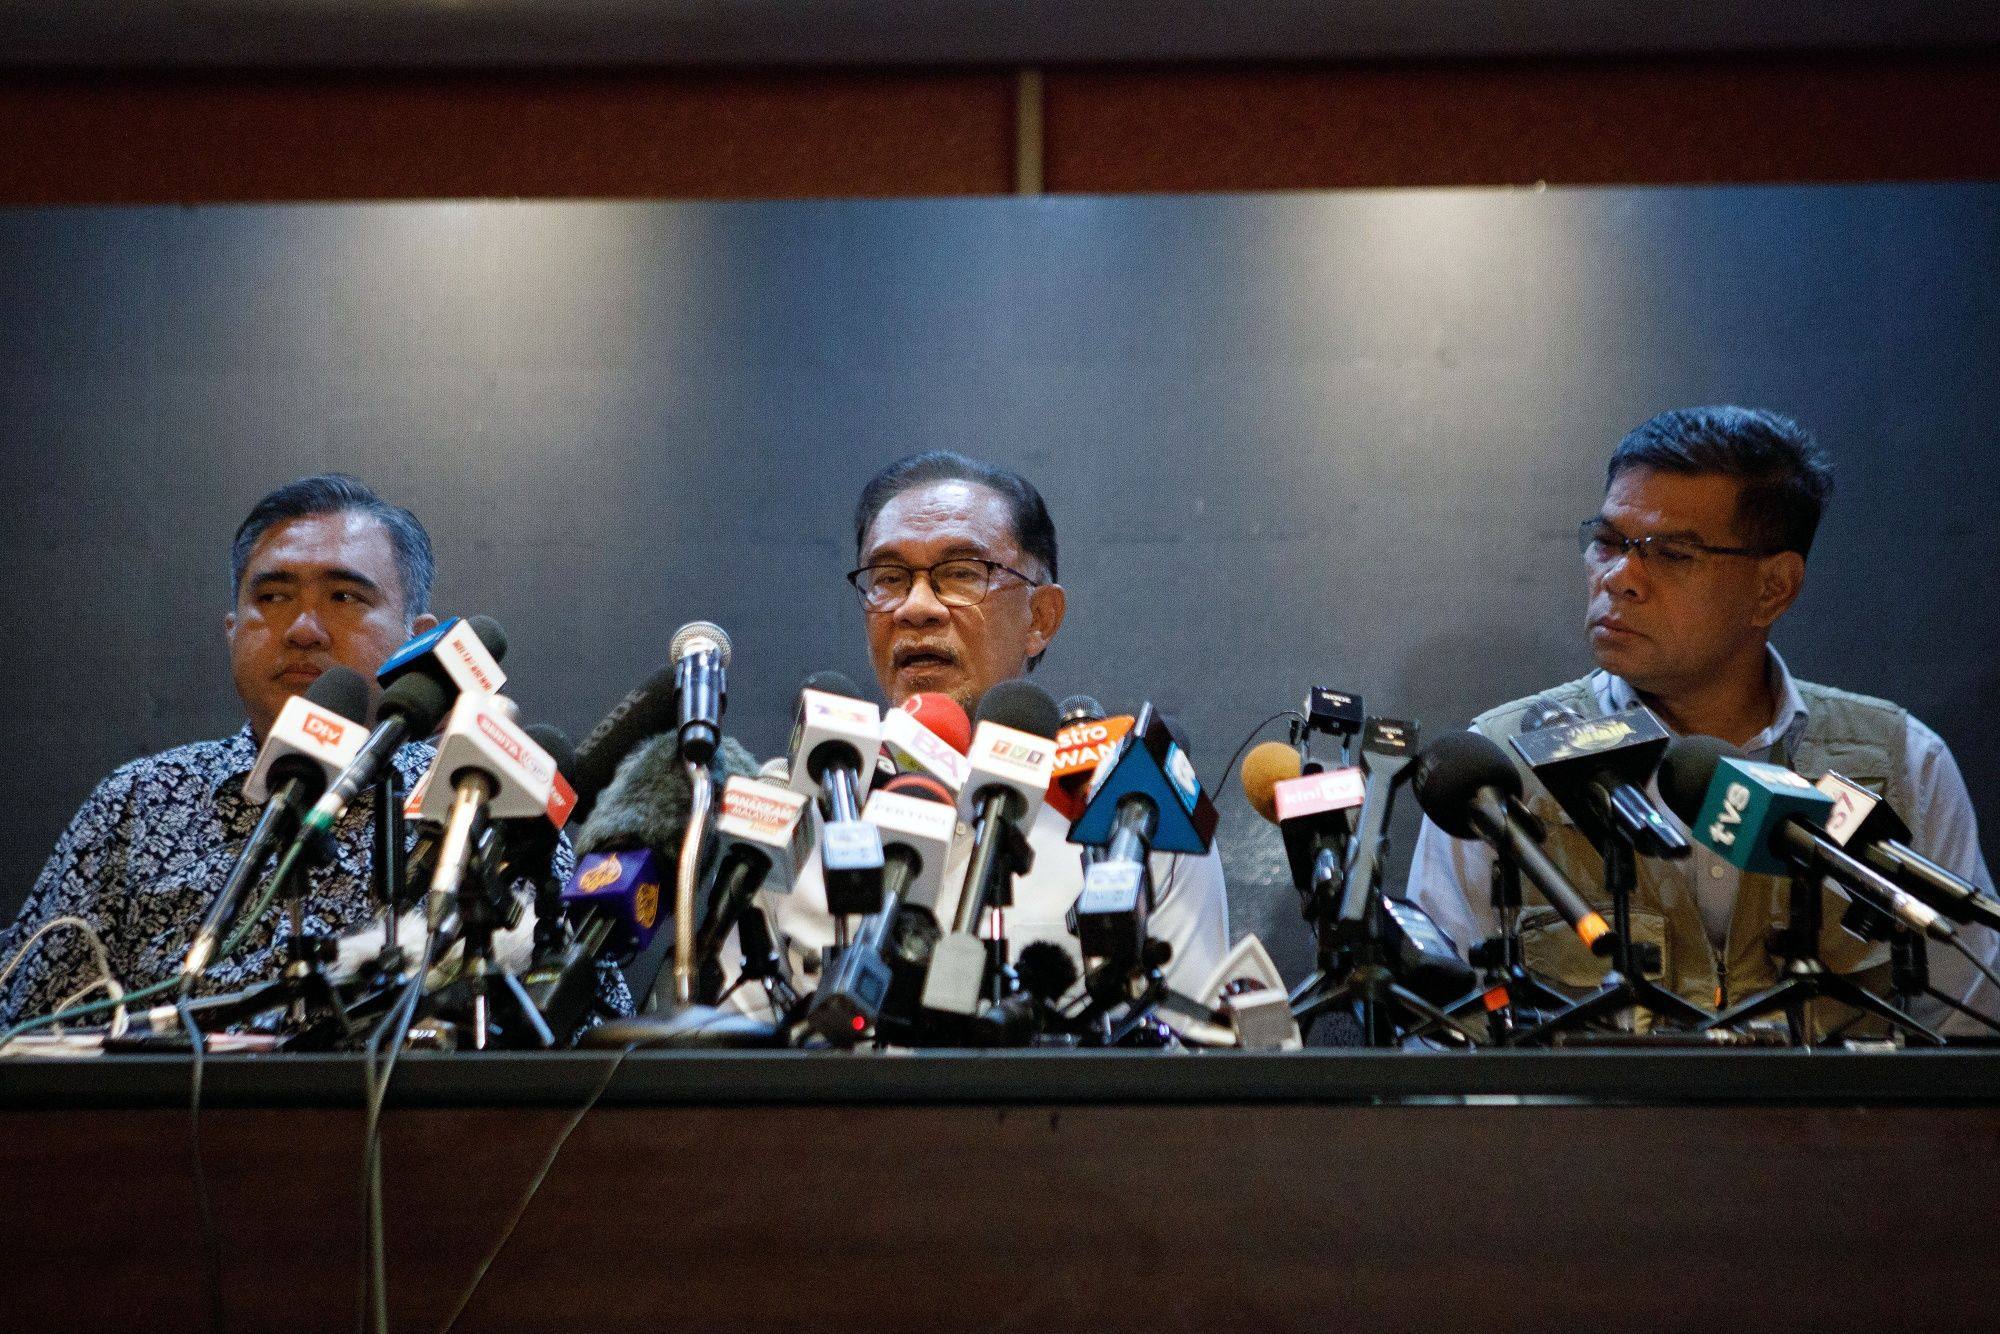 Anwar Ibrahim, Malaysia’s opposition leader (centre) speaks during a news conference on November 21. Anwar, who has come tantalisingly close to leading Malaysia during his tumultuous political career, is suddenly on the cusp of clinching the top job but a final hurdle stands in his way. Photo: Bloomberg